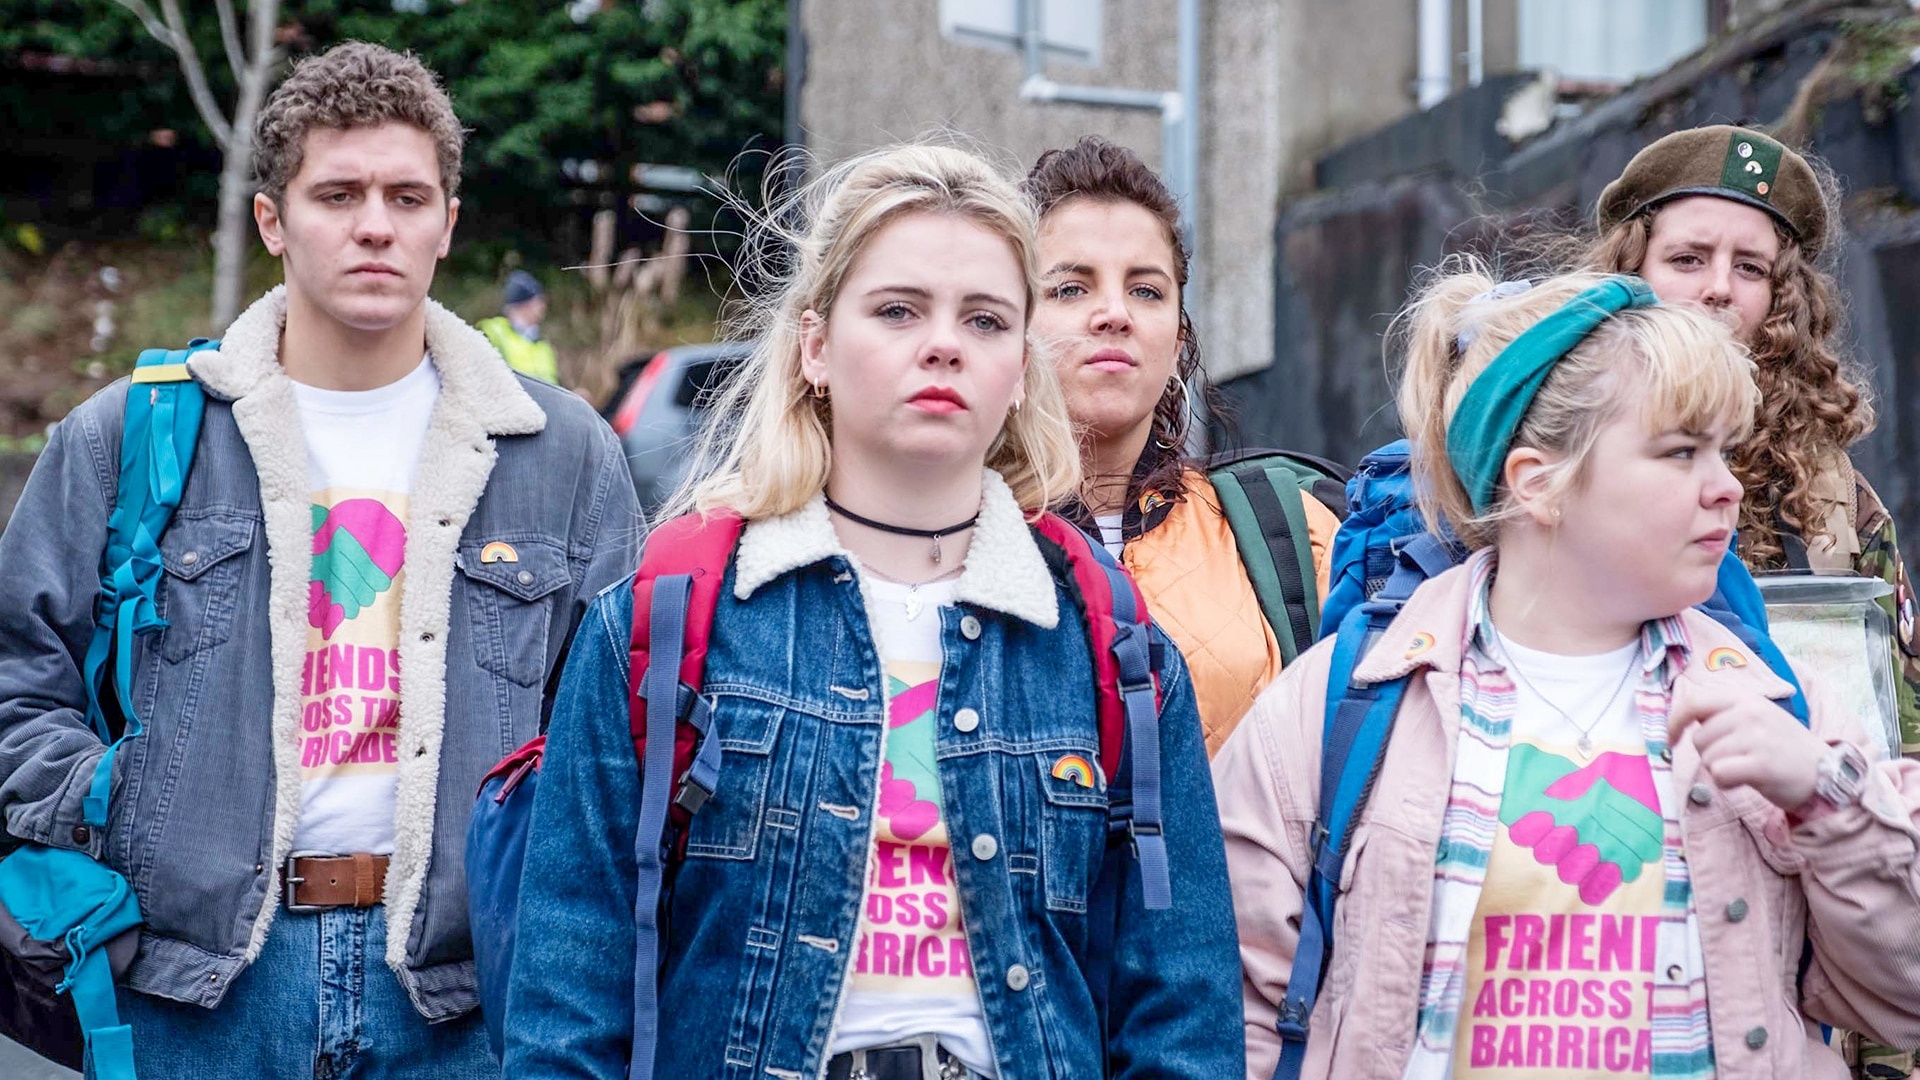 Derry Girls Series 2 Episode 1, Hilarious comedy, All episodes, Streaming, 1920x1080 Full HD Desktop